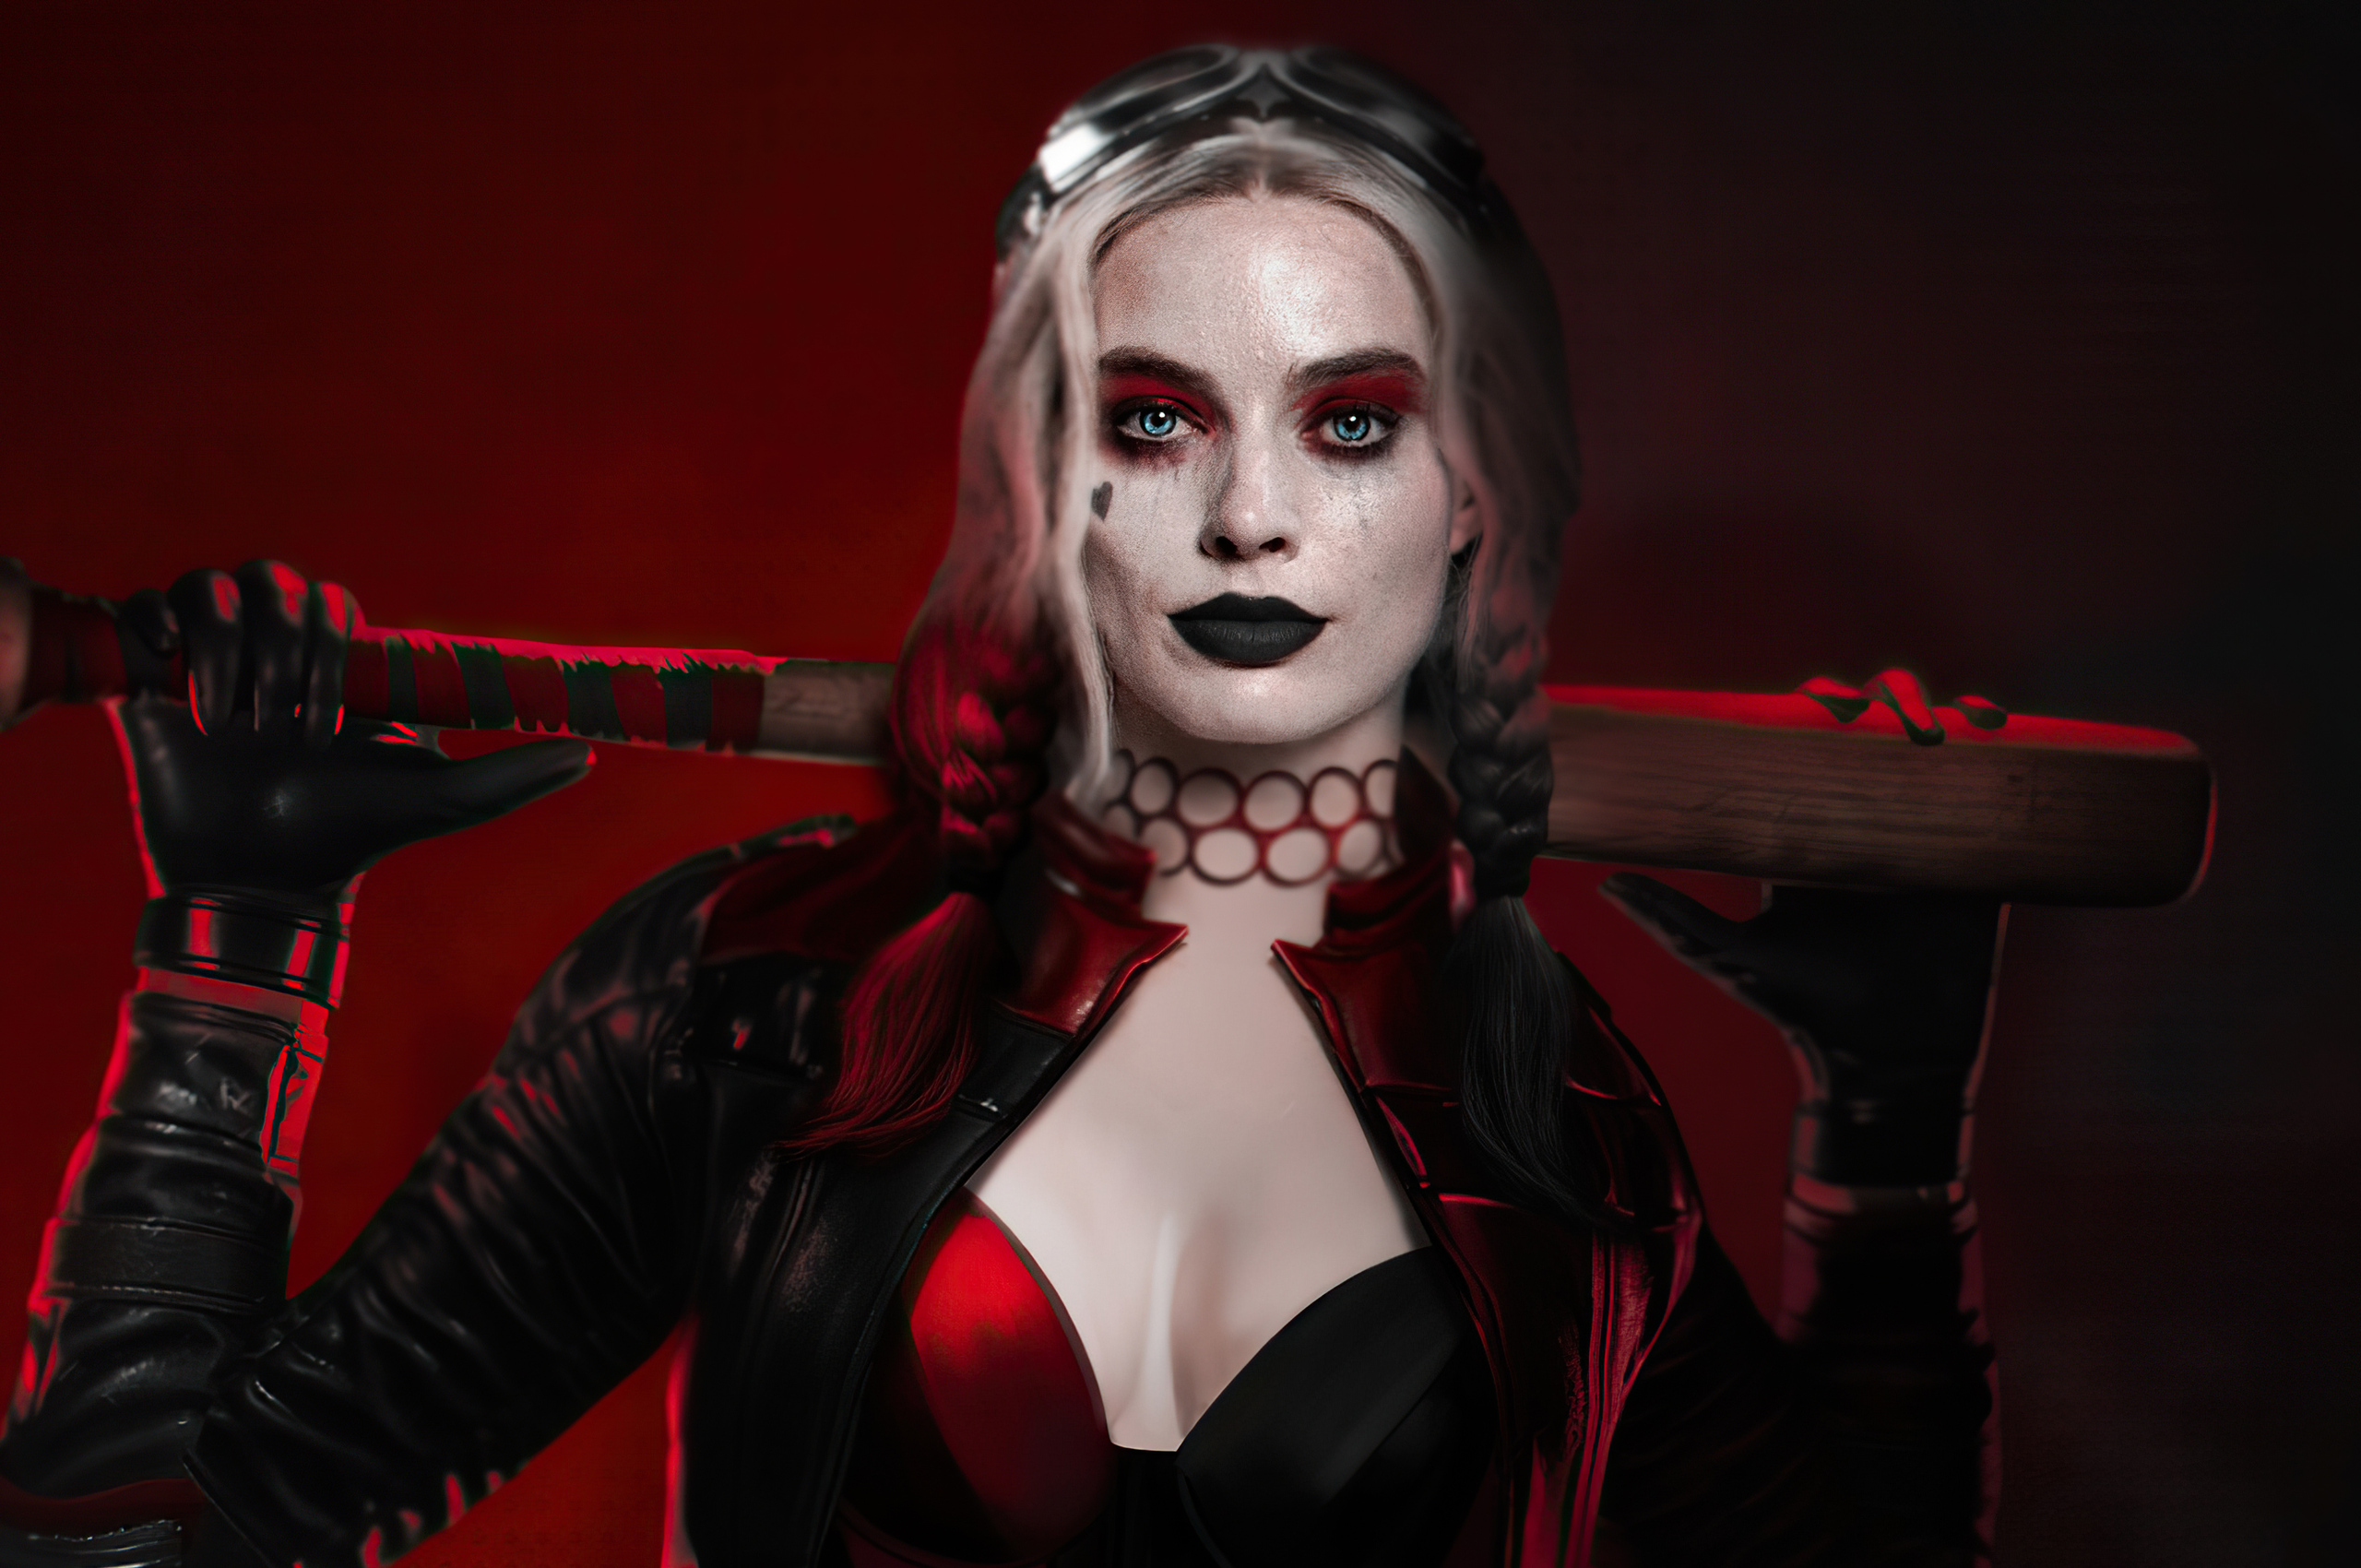 Injustice Suicide Squad Harley Quinn In 2560x1700 Resolution. 